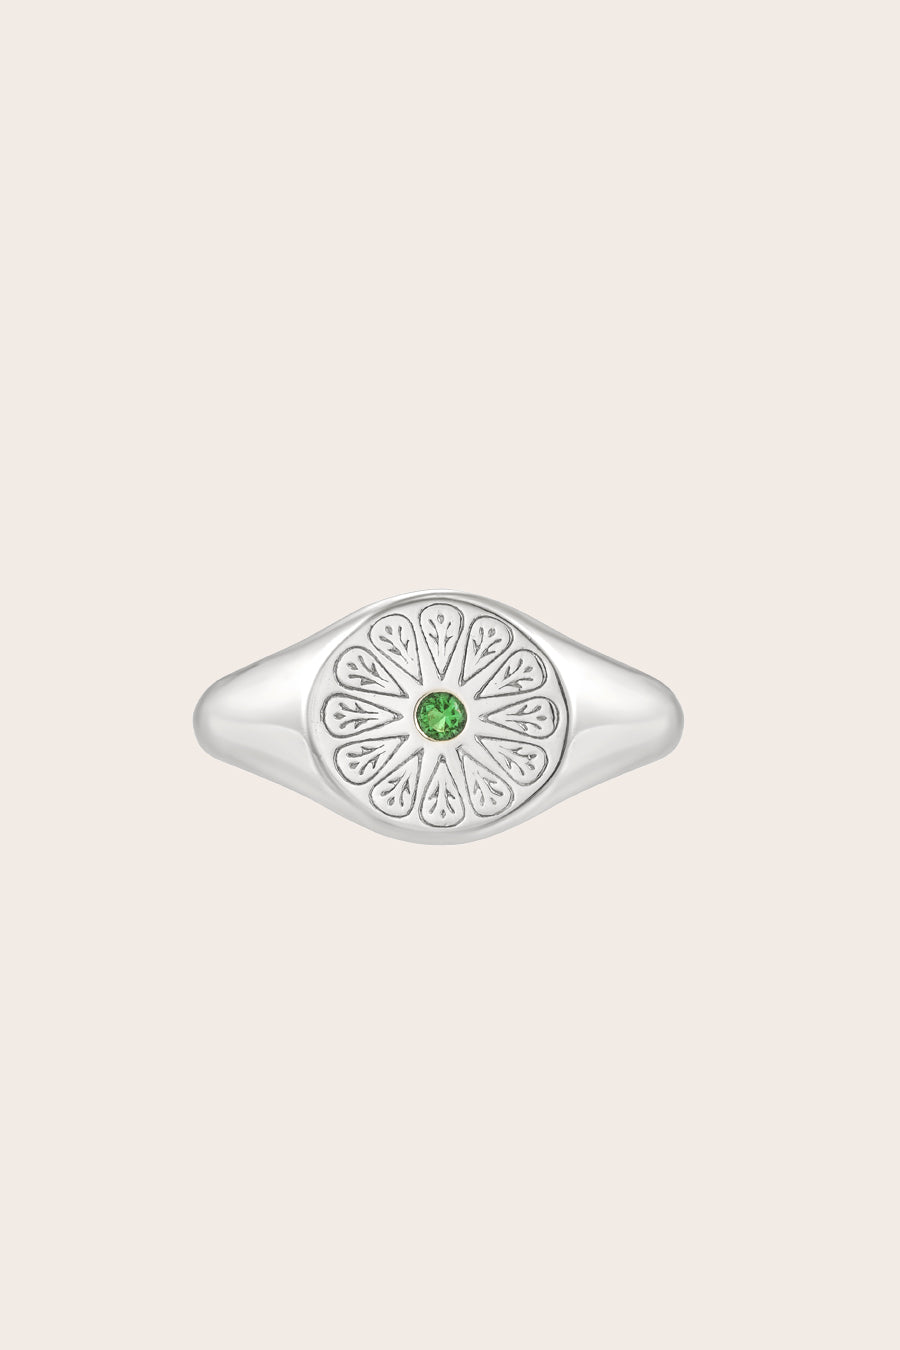 Silver May Emerald Signet Birthstone Ring on cream background